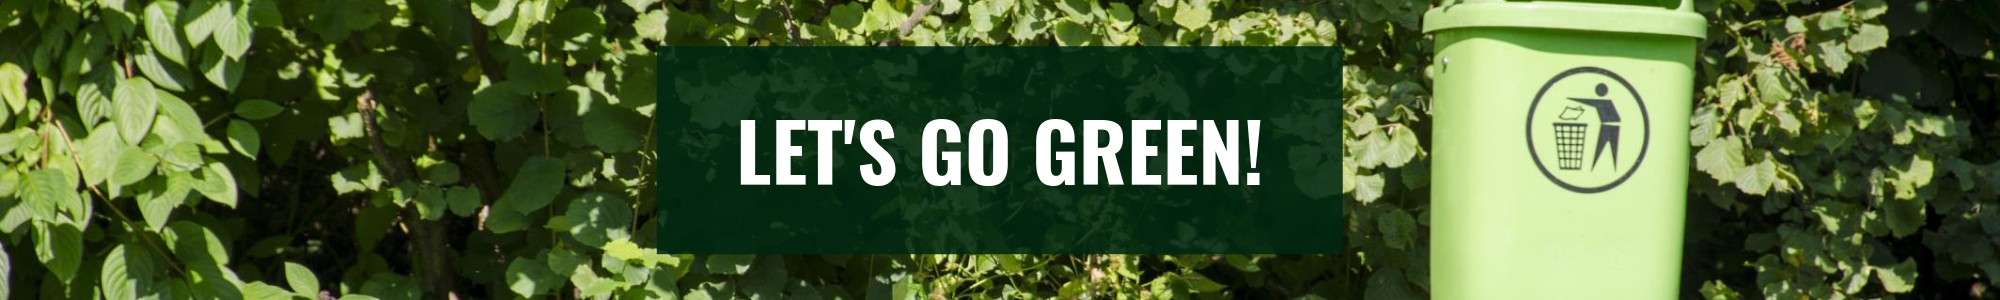 Let's Go Green! 